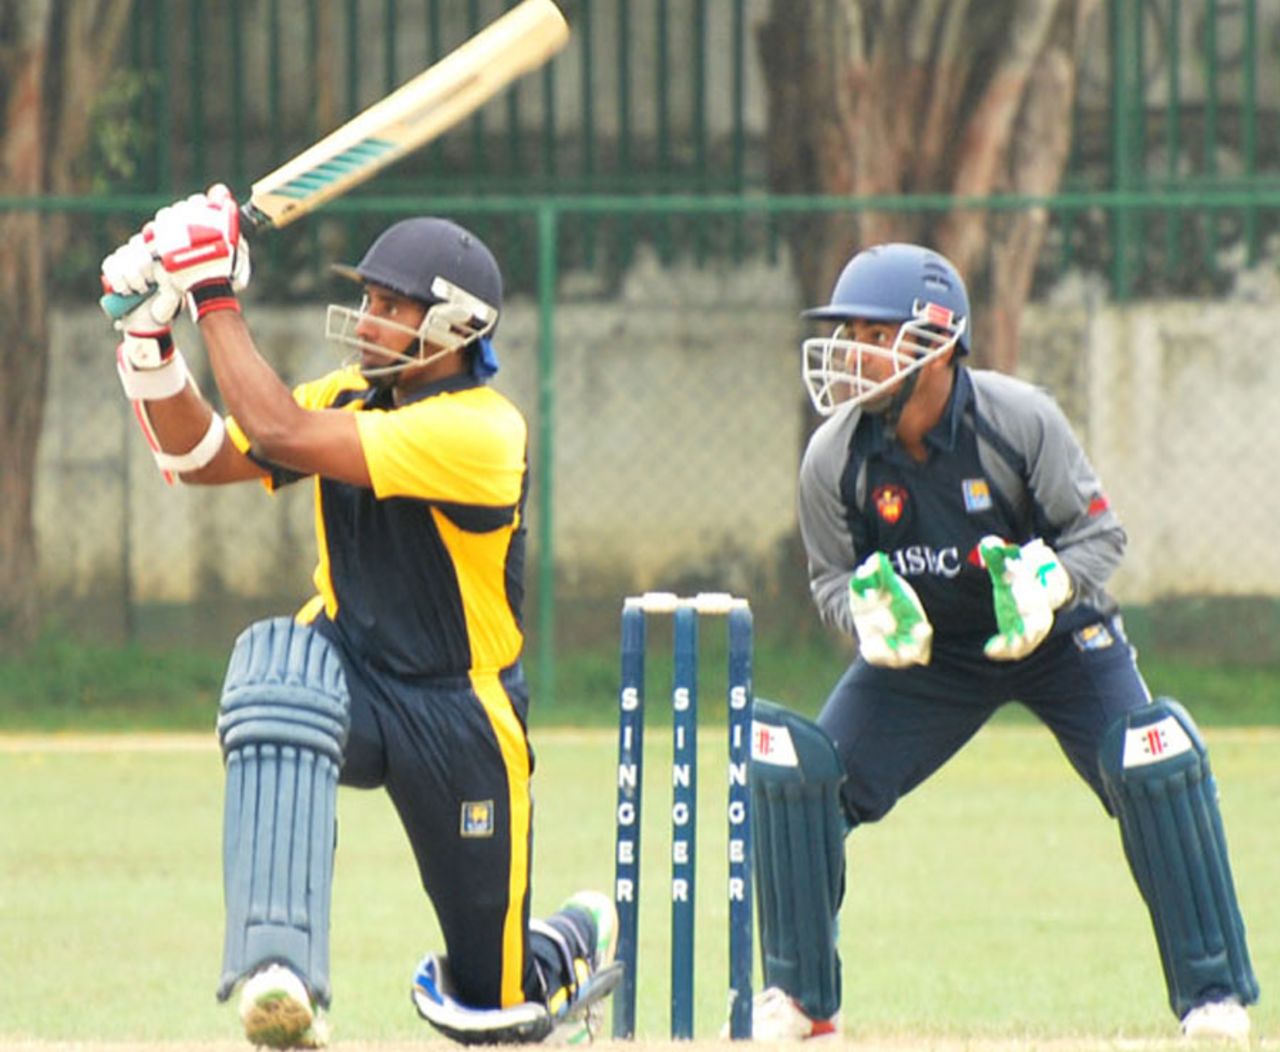 Chaminda Vaas opens the batting for Colts, Sinhalese Sports Club v Colts Cricket Club, Colombo, Premier Limited Over Tournament, December 27